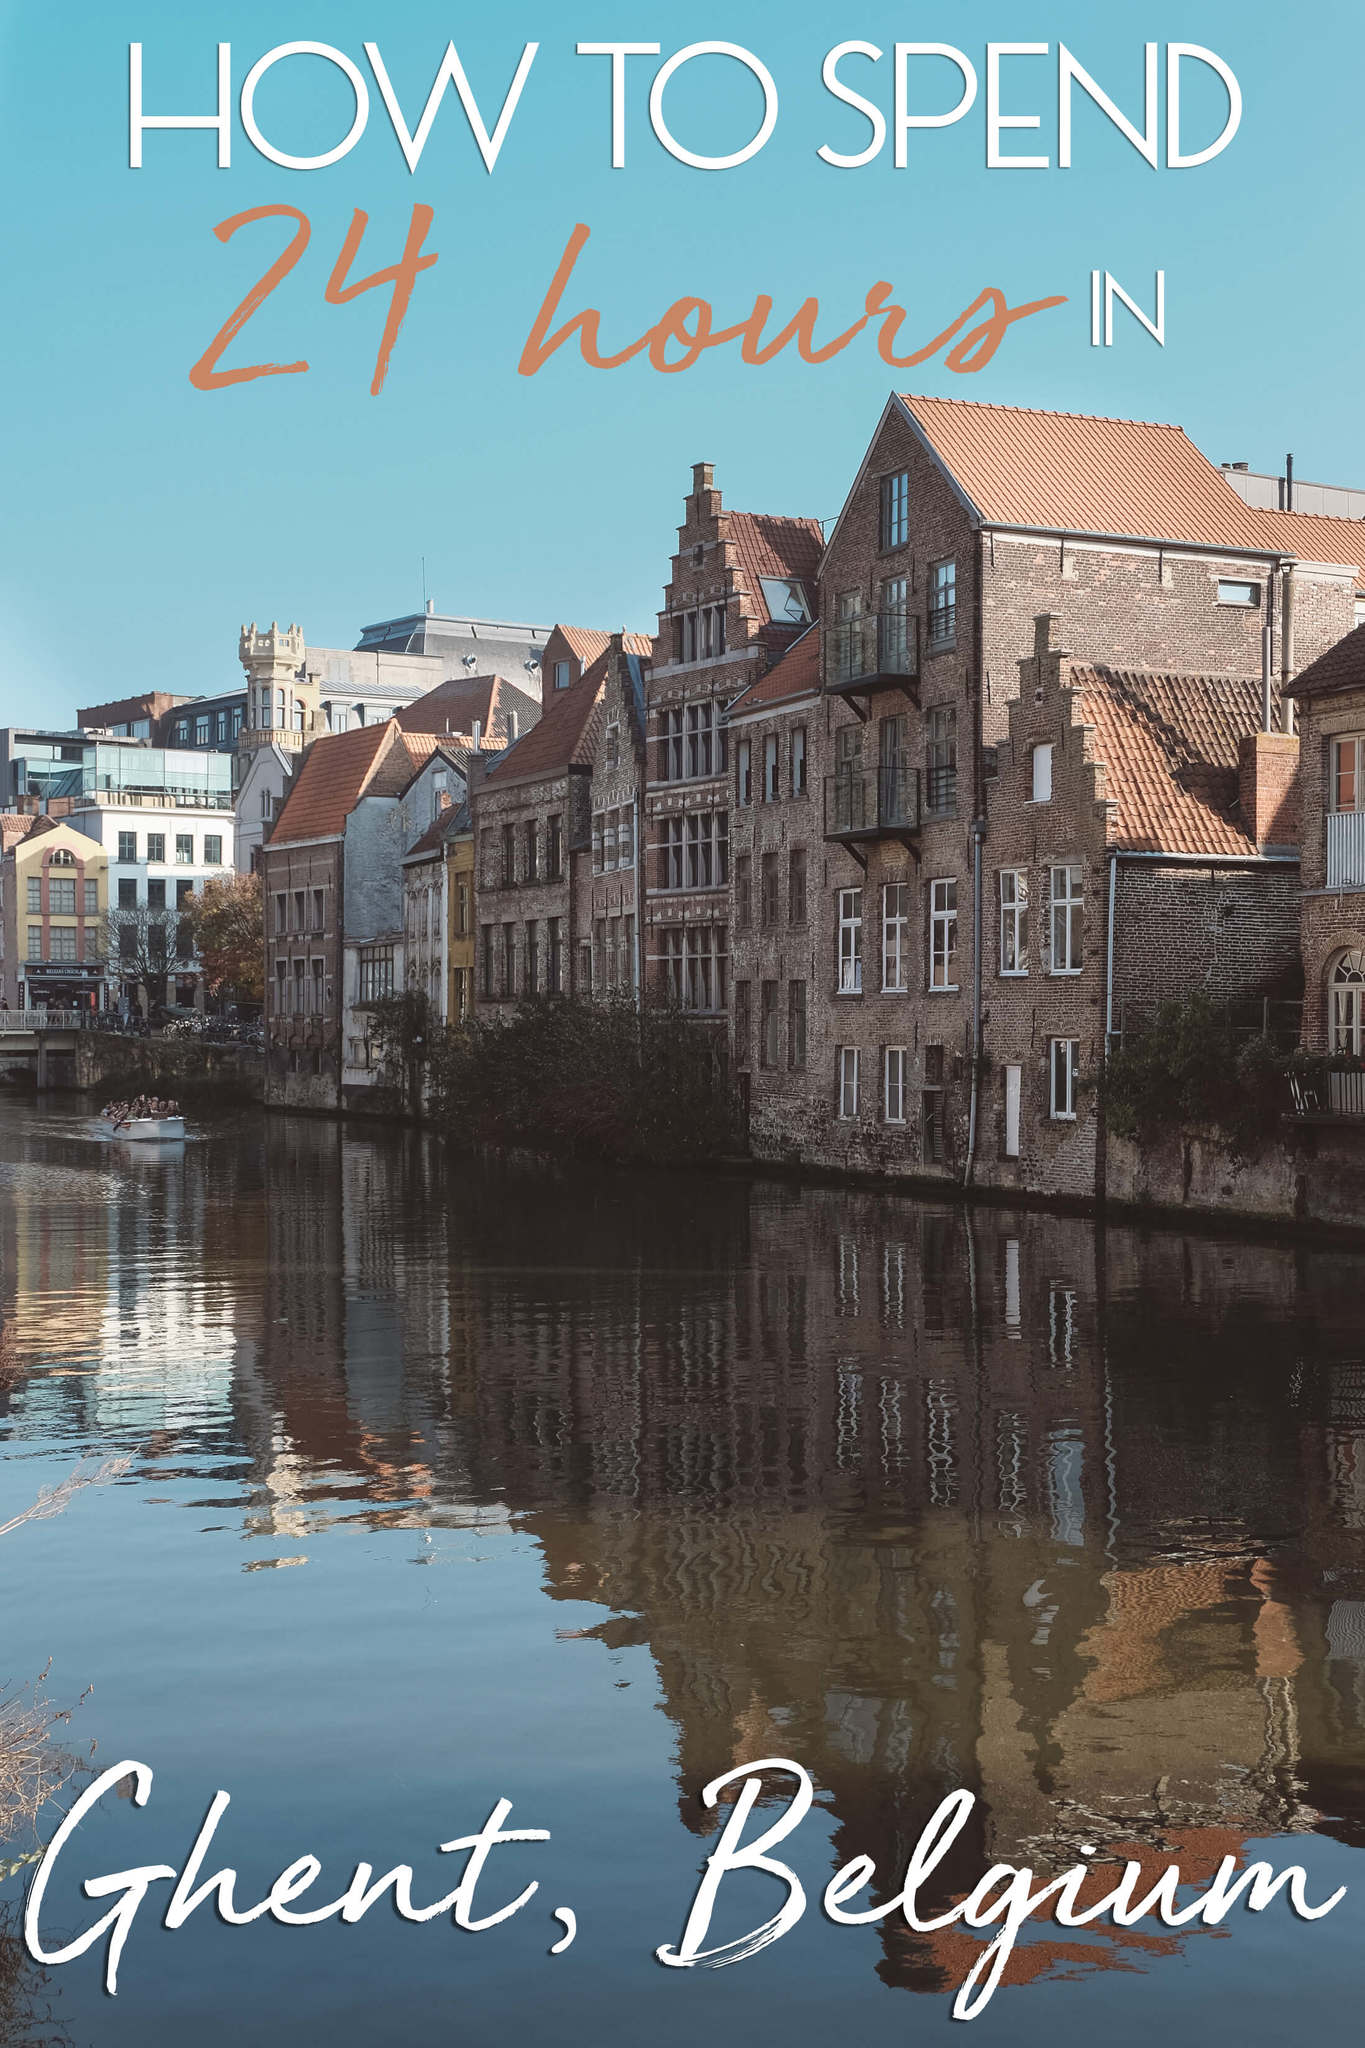 How-to-Spend-24-Hours-in-Ghent-Belgium